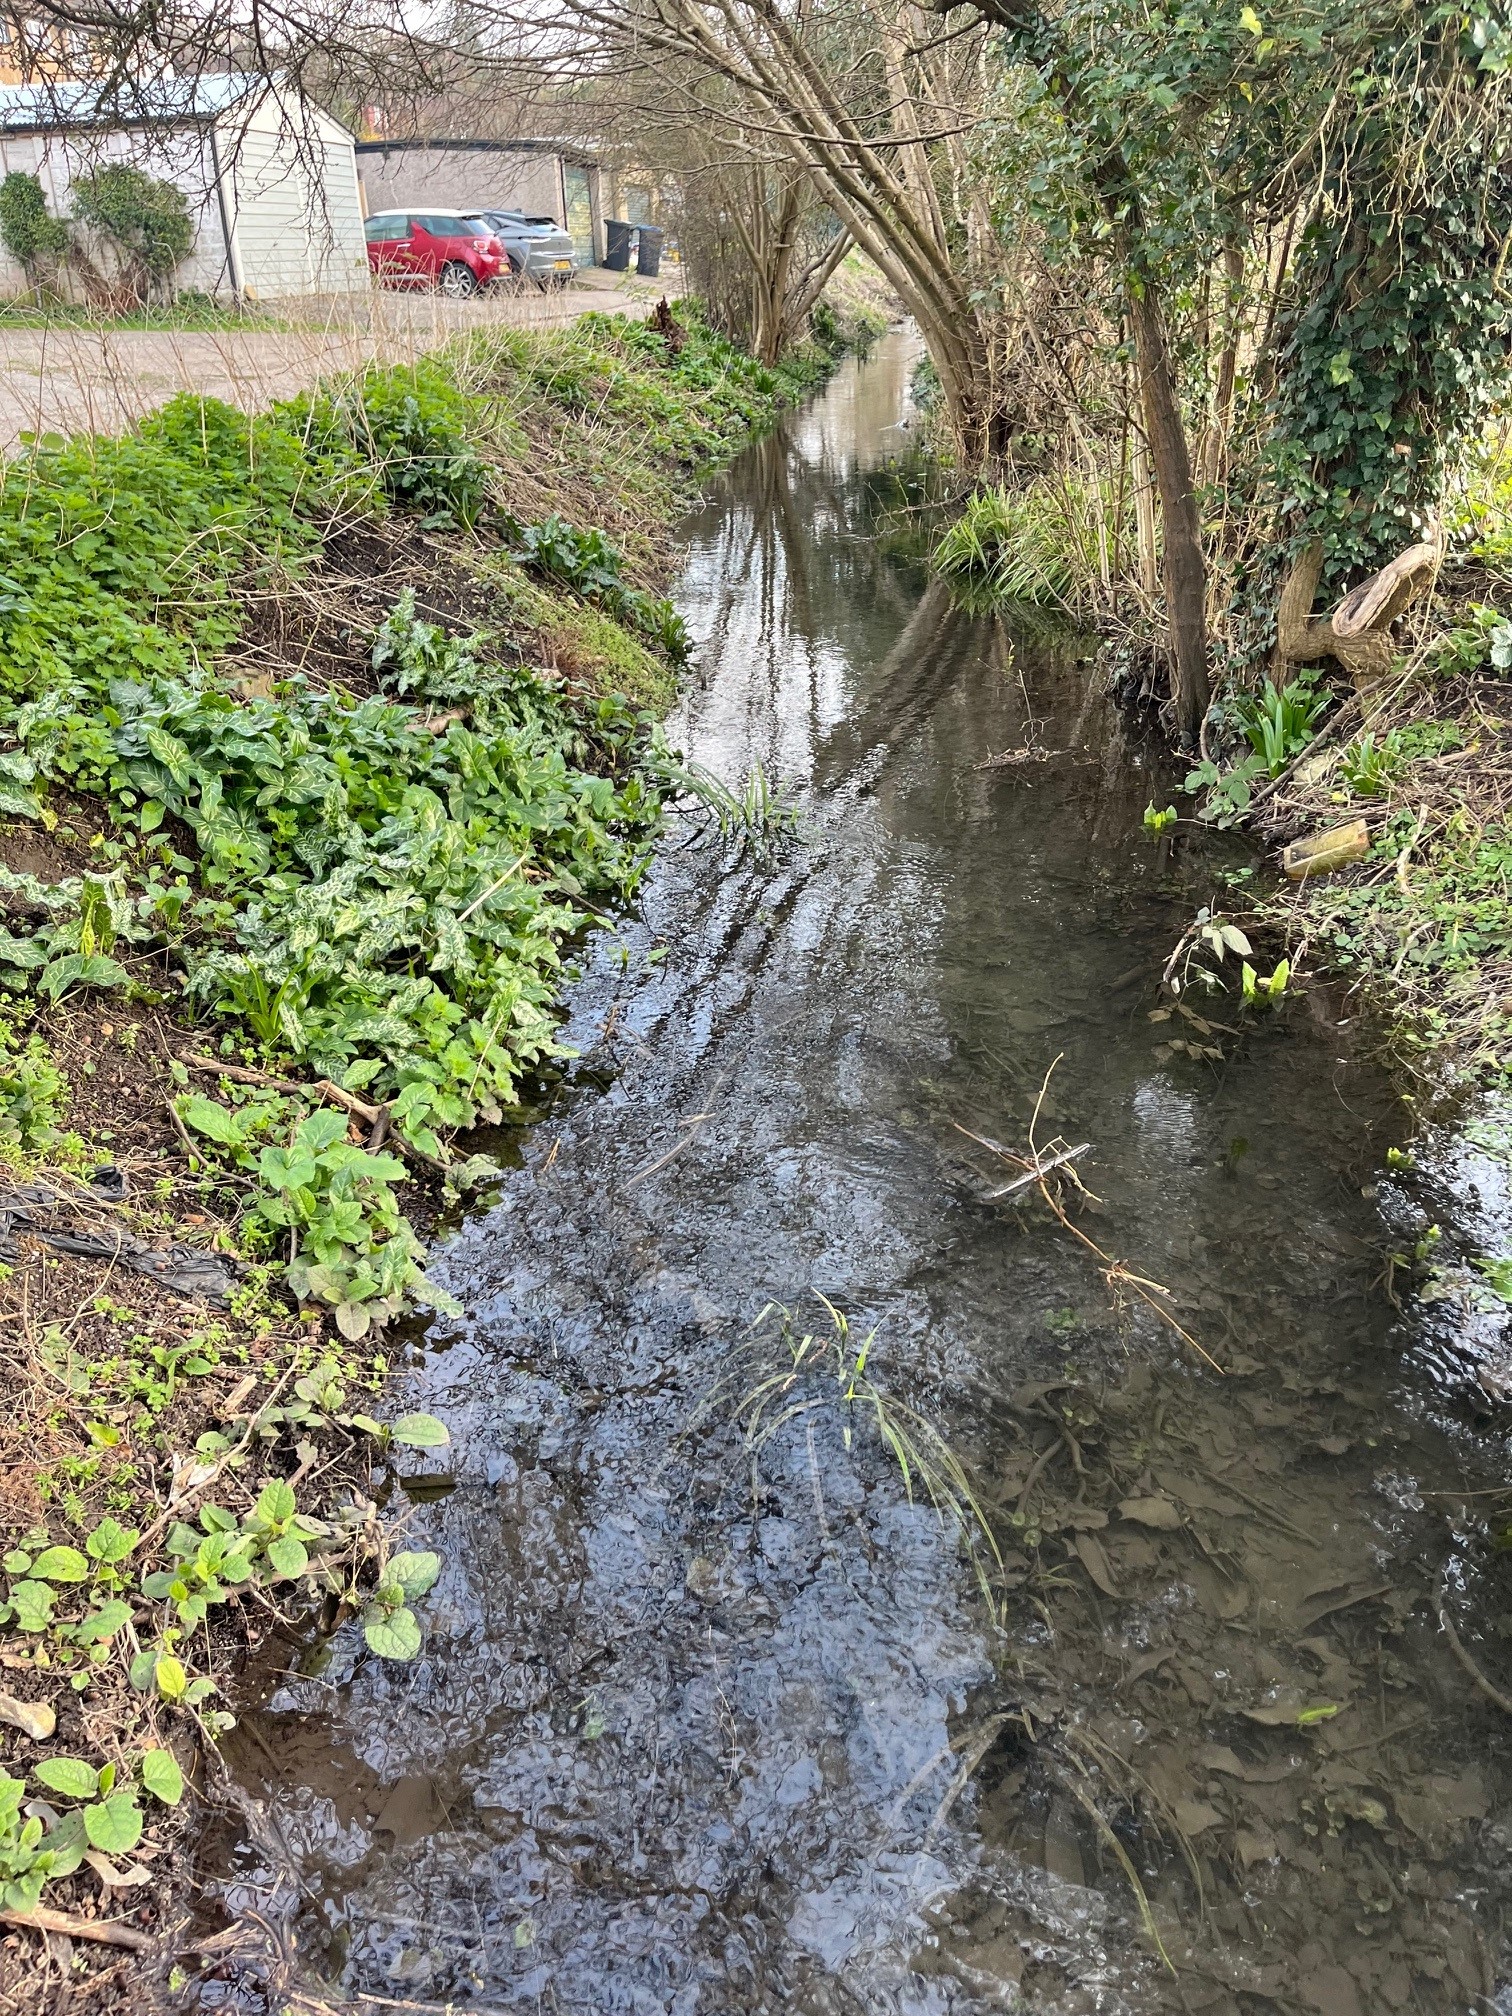 Bourne flowing through the old allotments